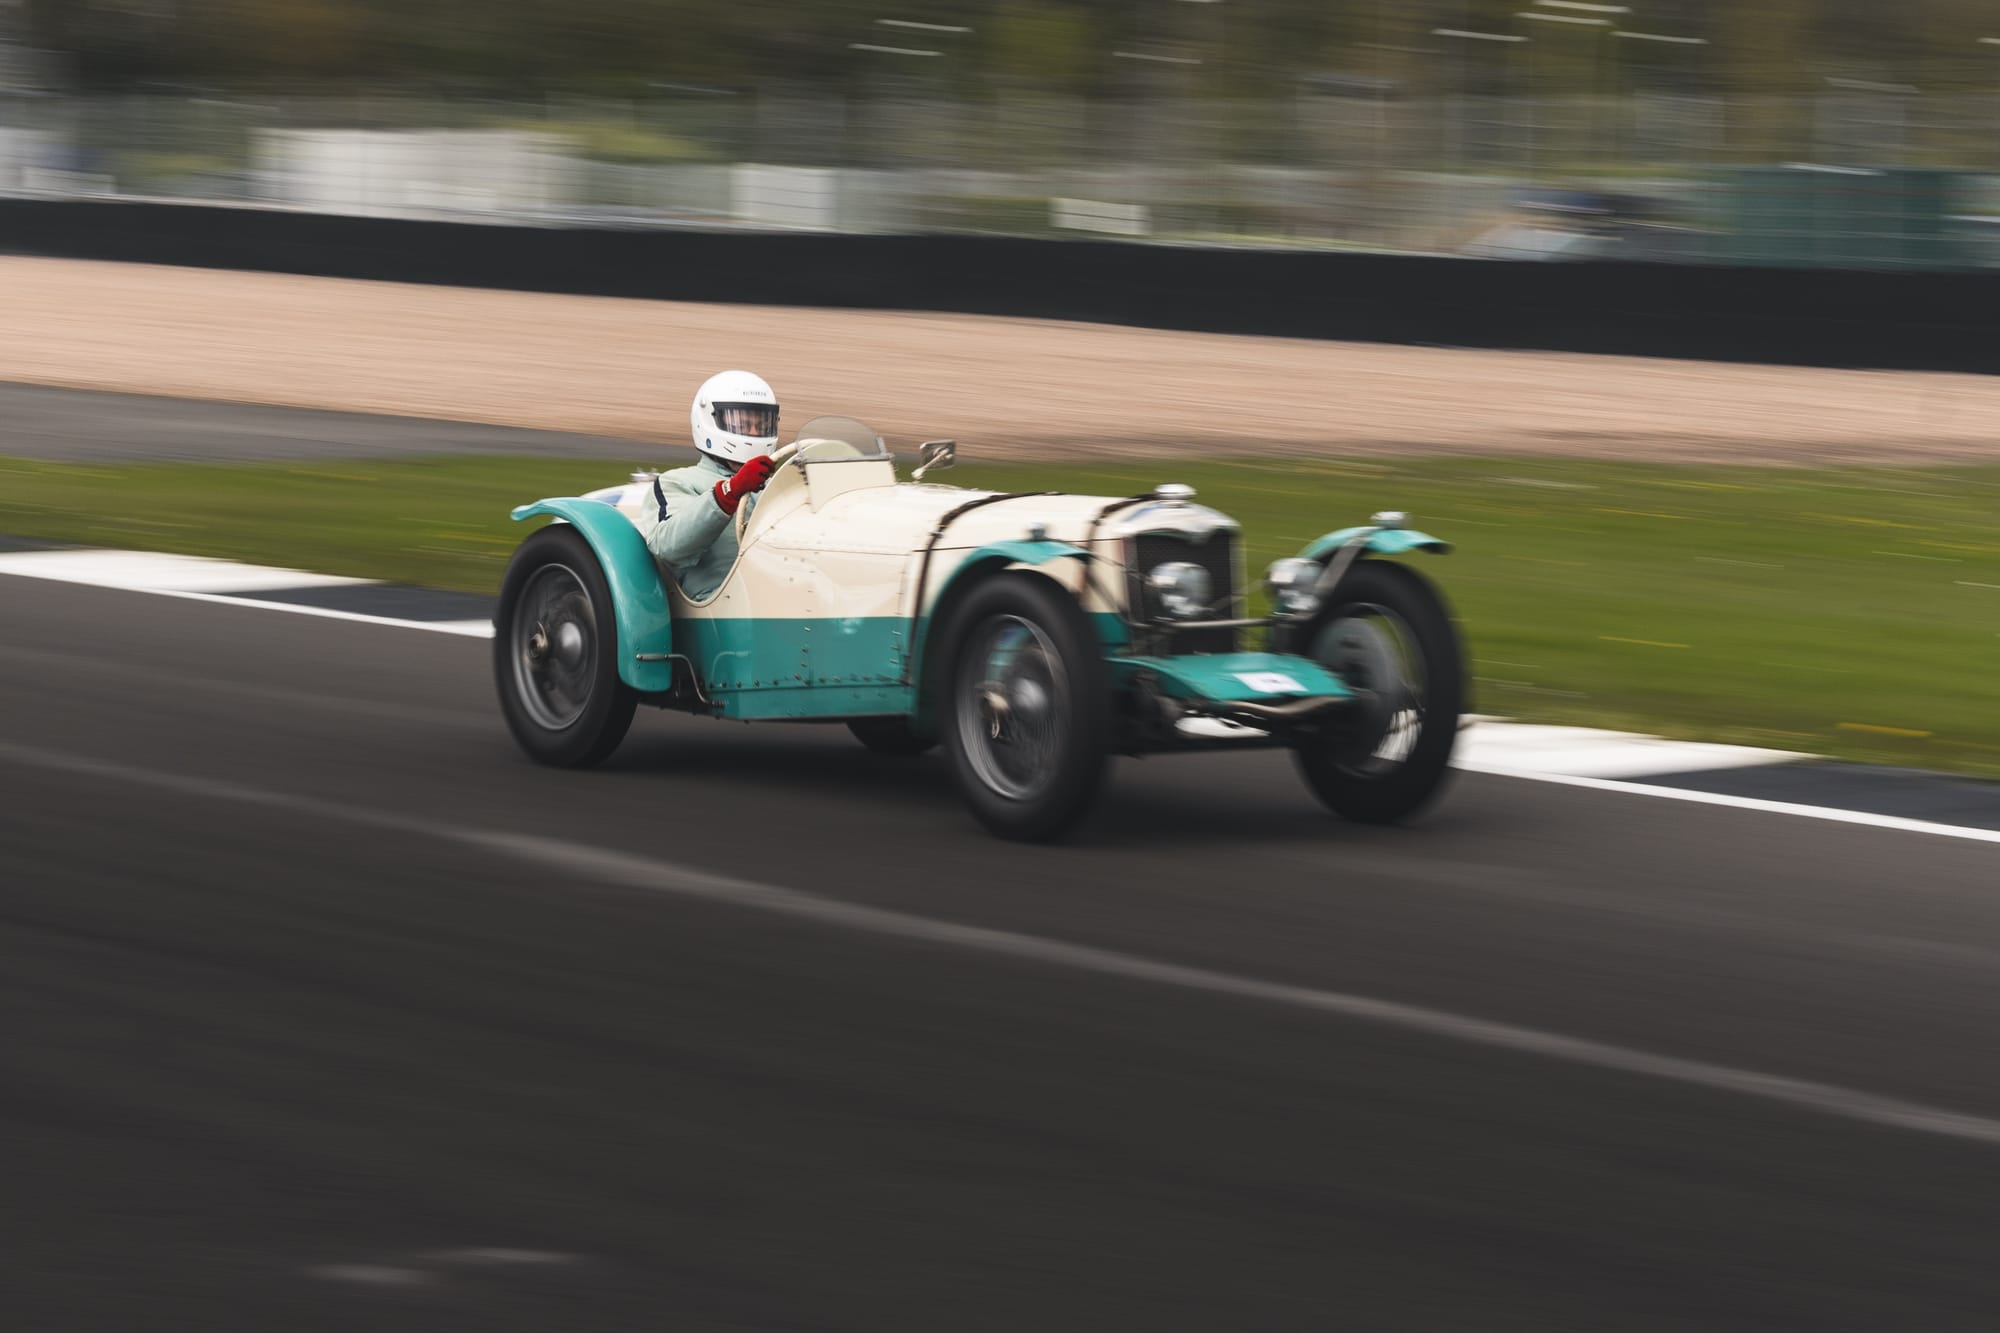 Springing into action with the VSCC